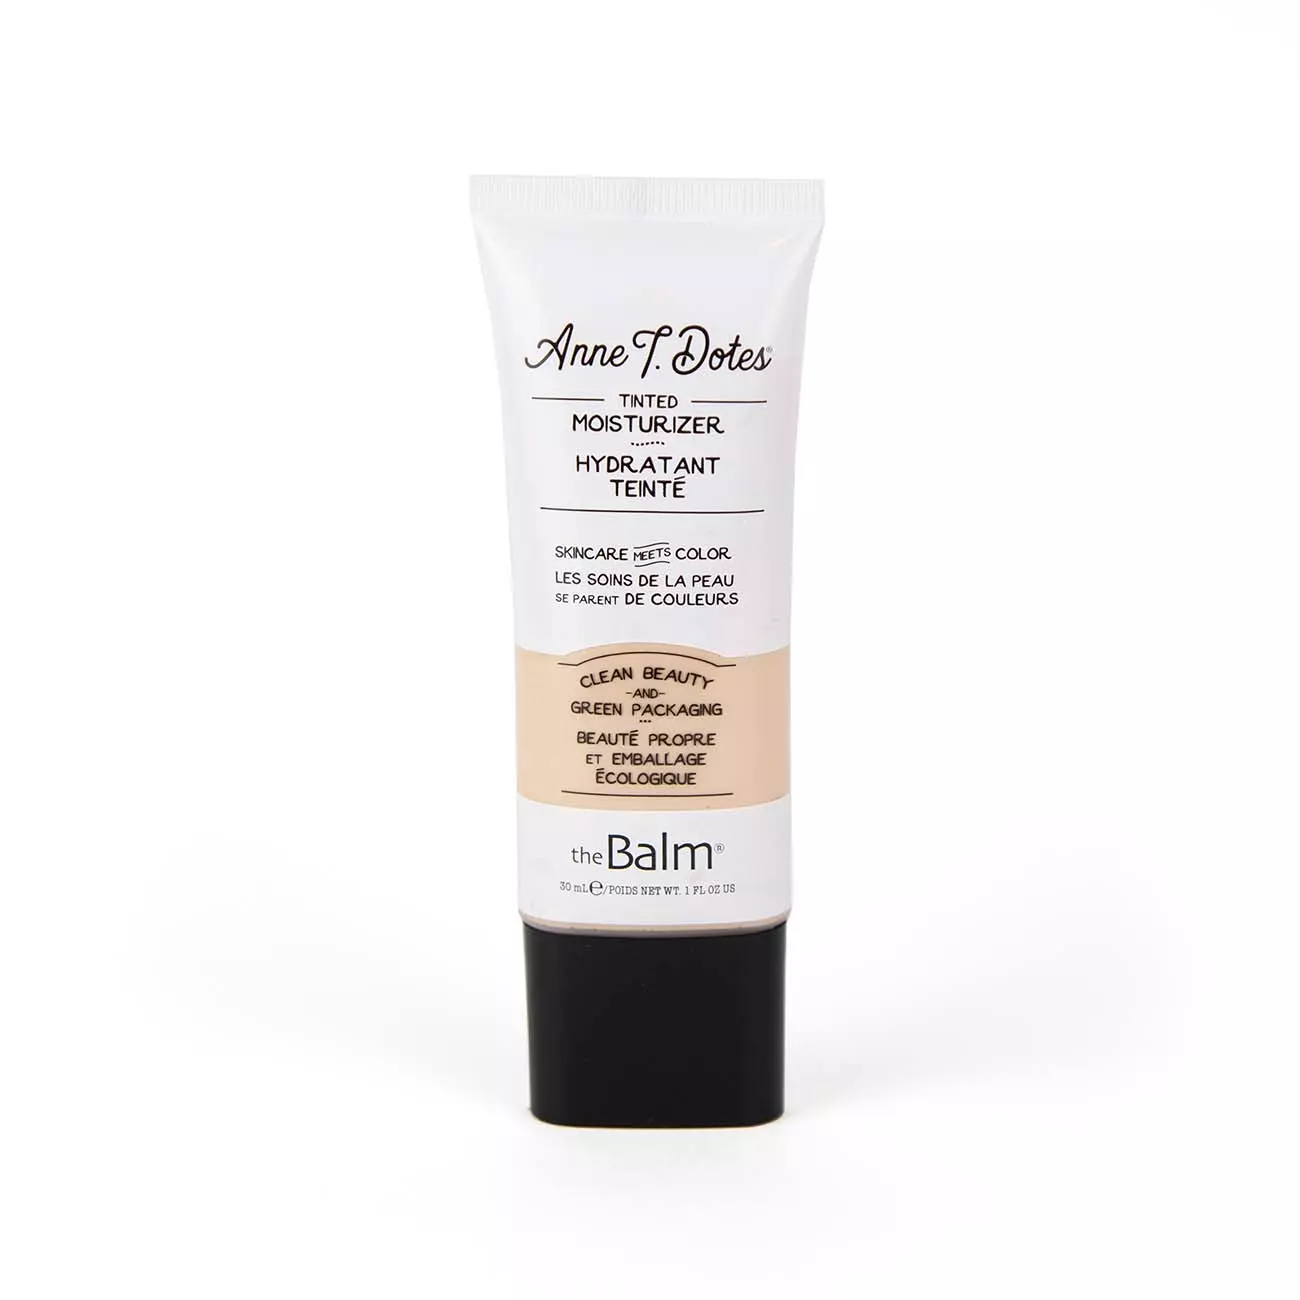 The Balm Anne T. Dotes Tinted Moisturizer